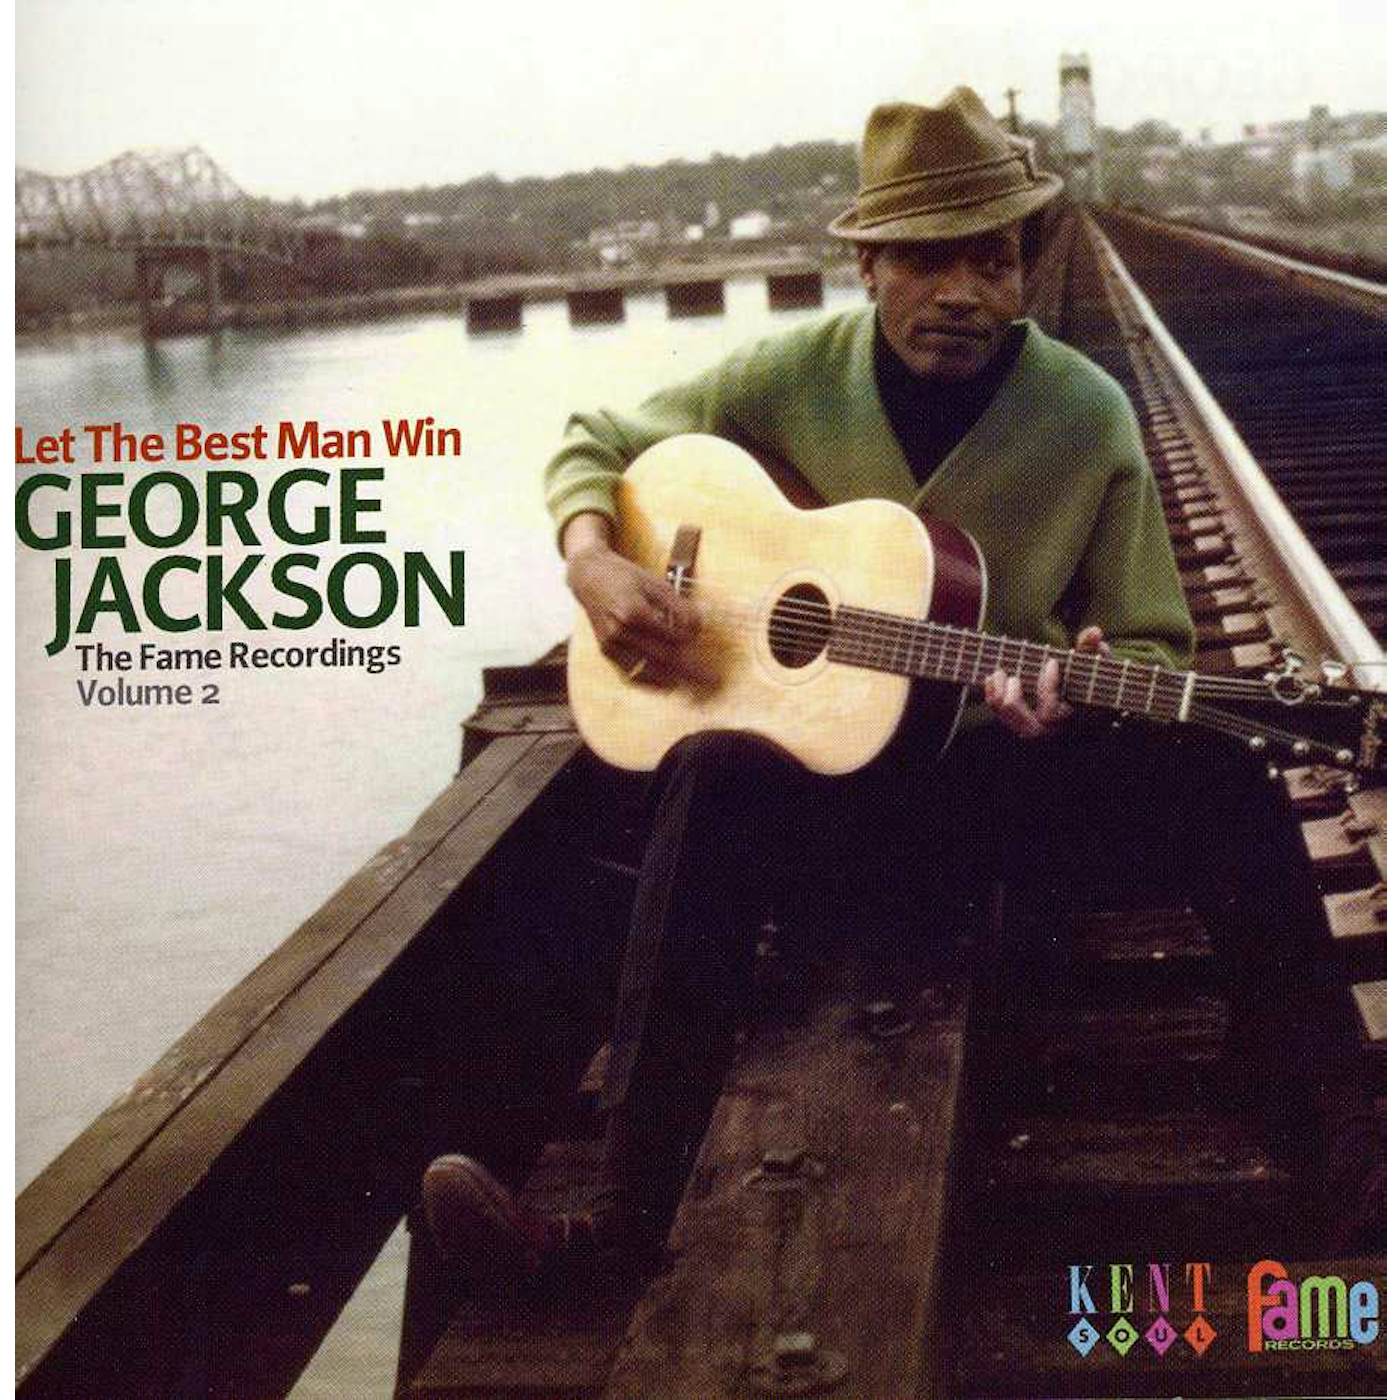 George Jackson LET THE BEST MAN WIN: FAME RECORDINGS 2 CD